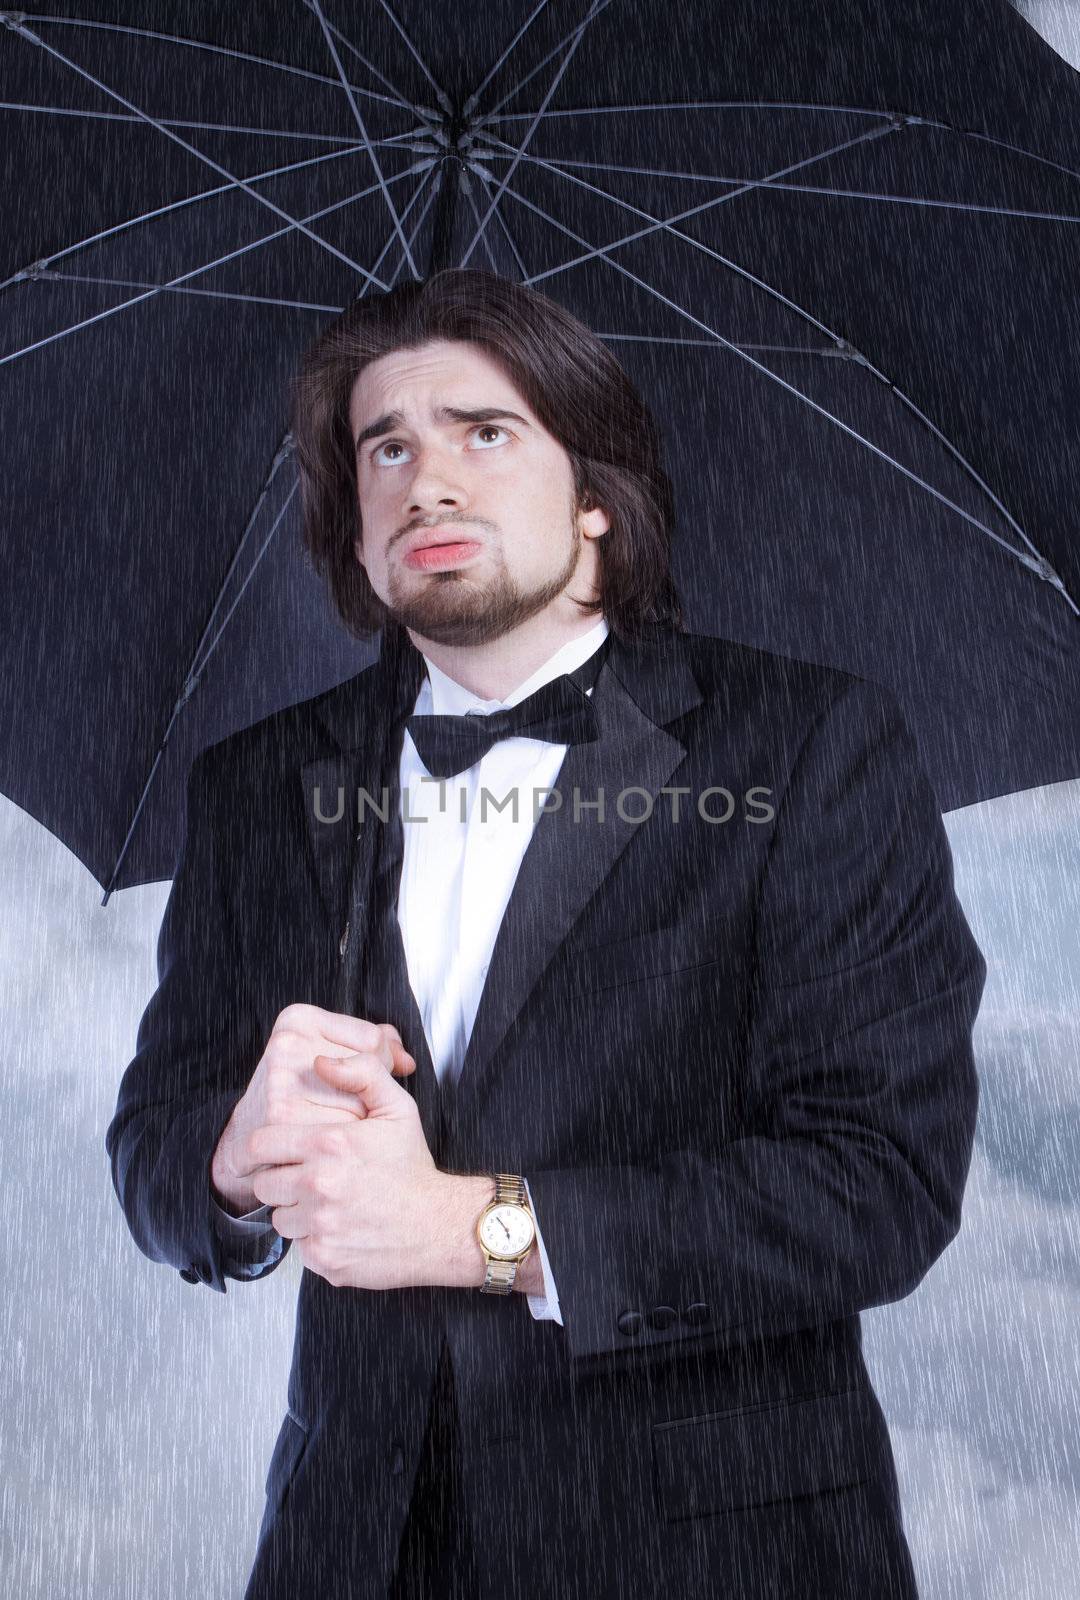 Unhappy Man in Suit Holding Umbrella in the Rain and Sighing